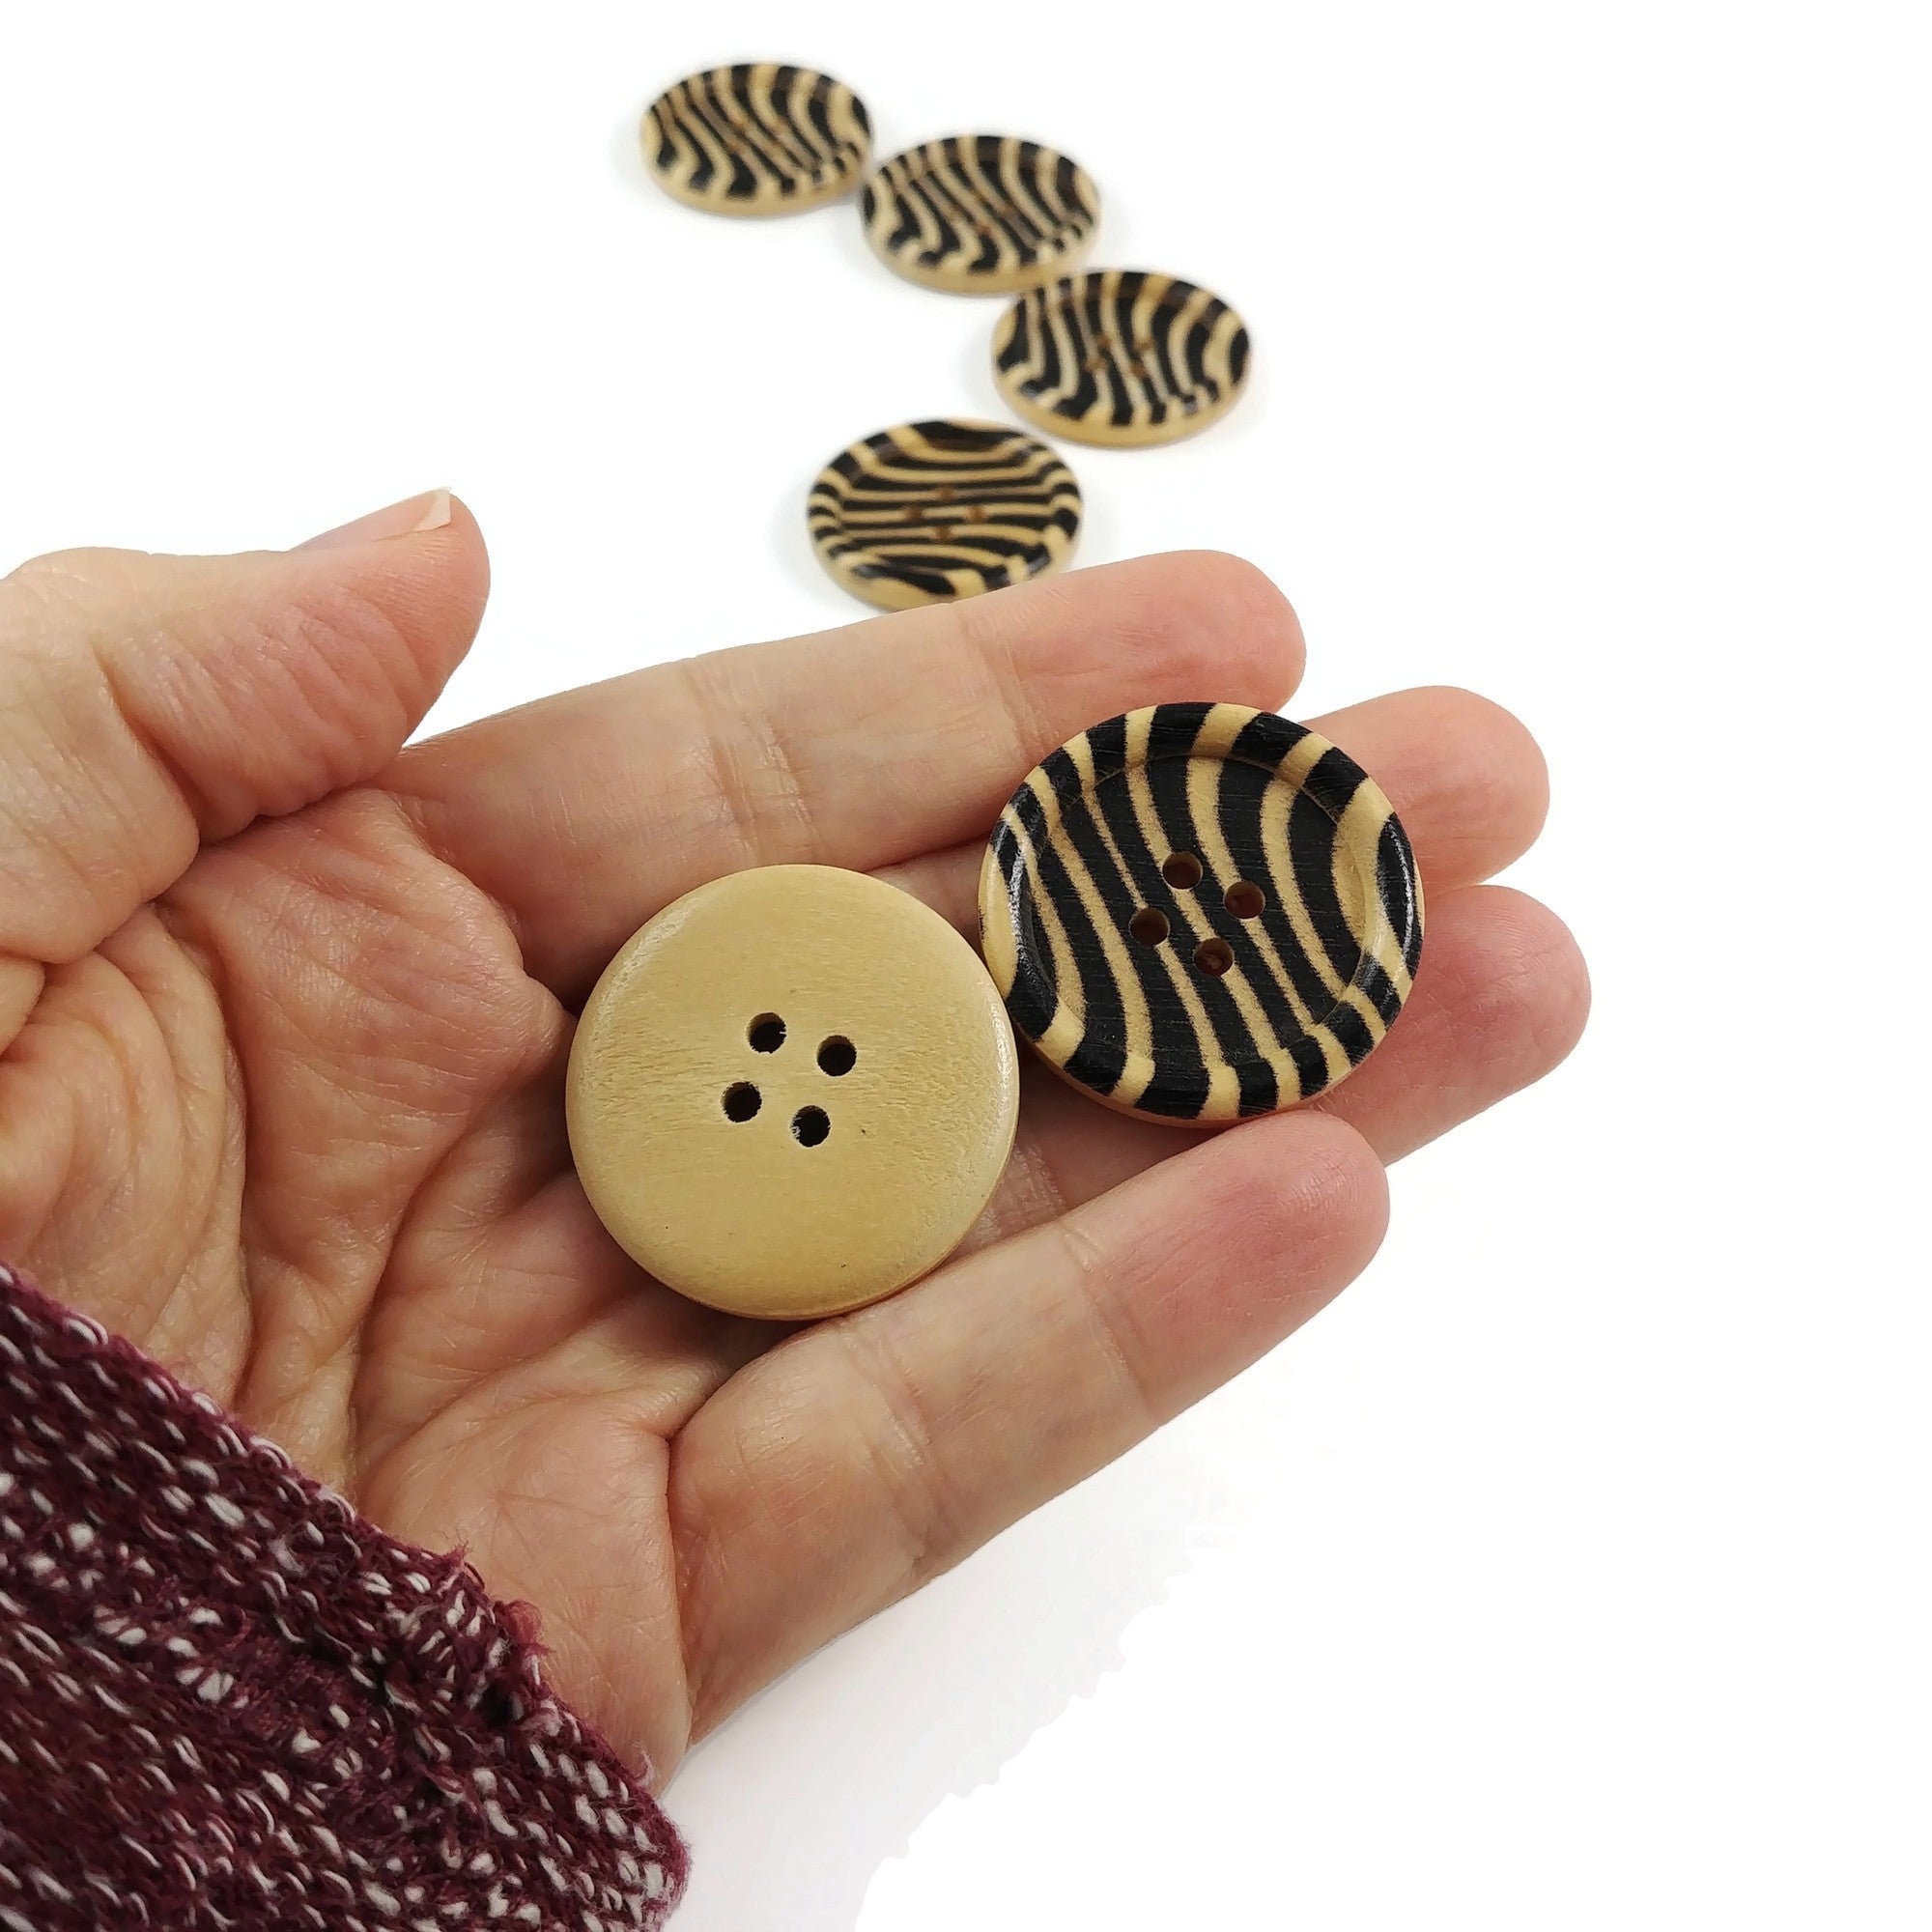 Zebra Pattern Wooden Sewing Buttons 30mm - Natural and Black wood button set of 6